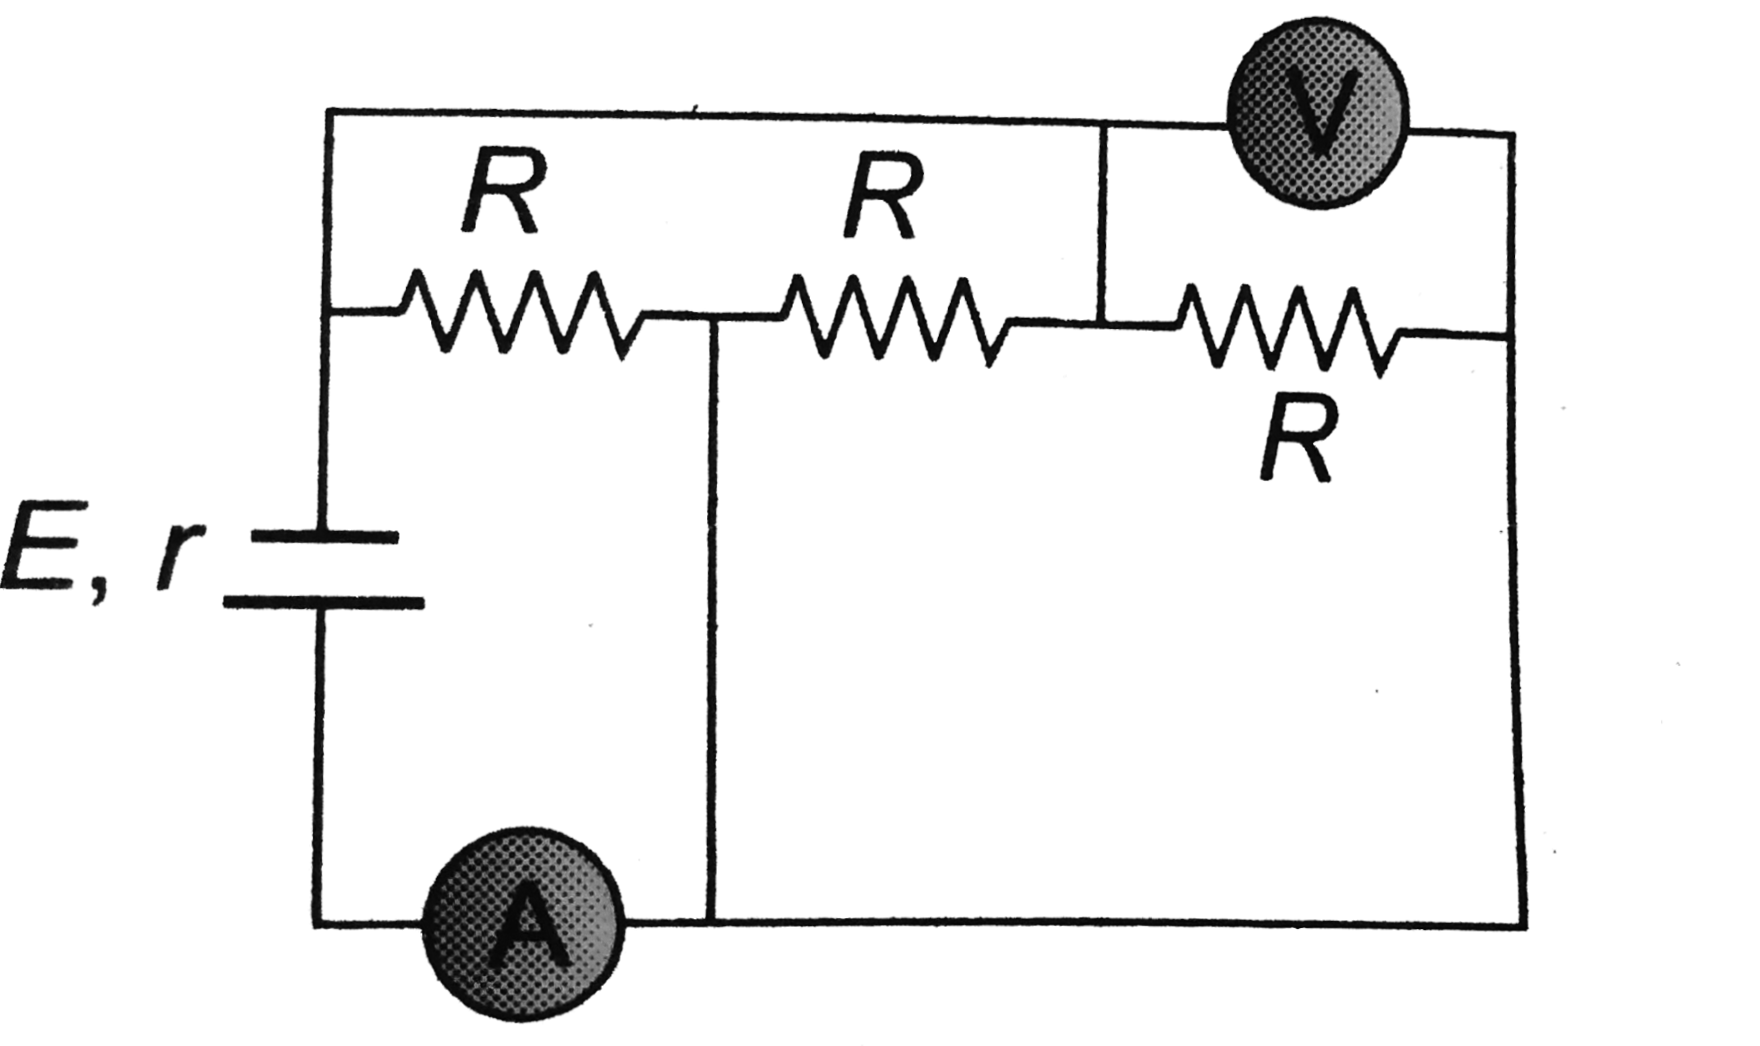 In the circuit shwon in figure, ammeter and voltmeter are ideal. E = 4 V, R = 15 Omega and r = 1 Omega, then reading of ammter (in A) and voltmeter (in V) respectively are: